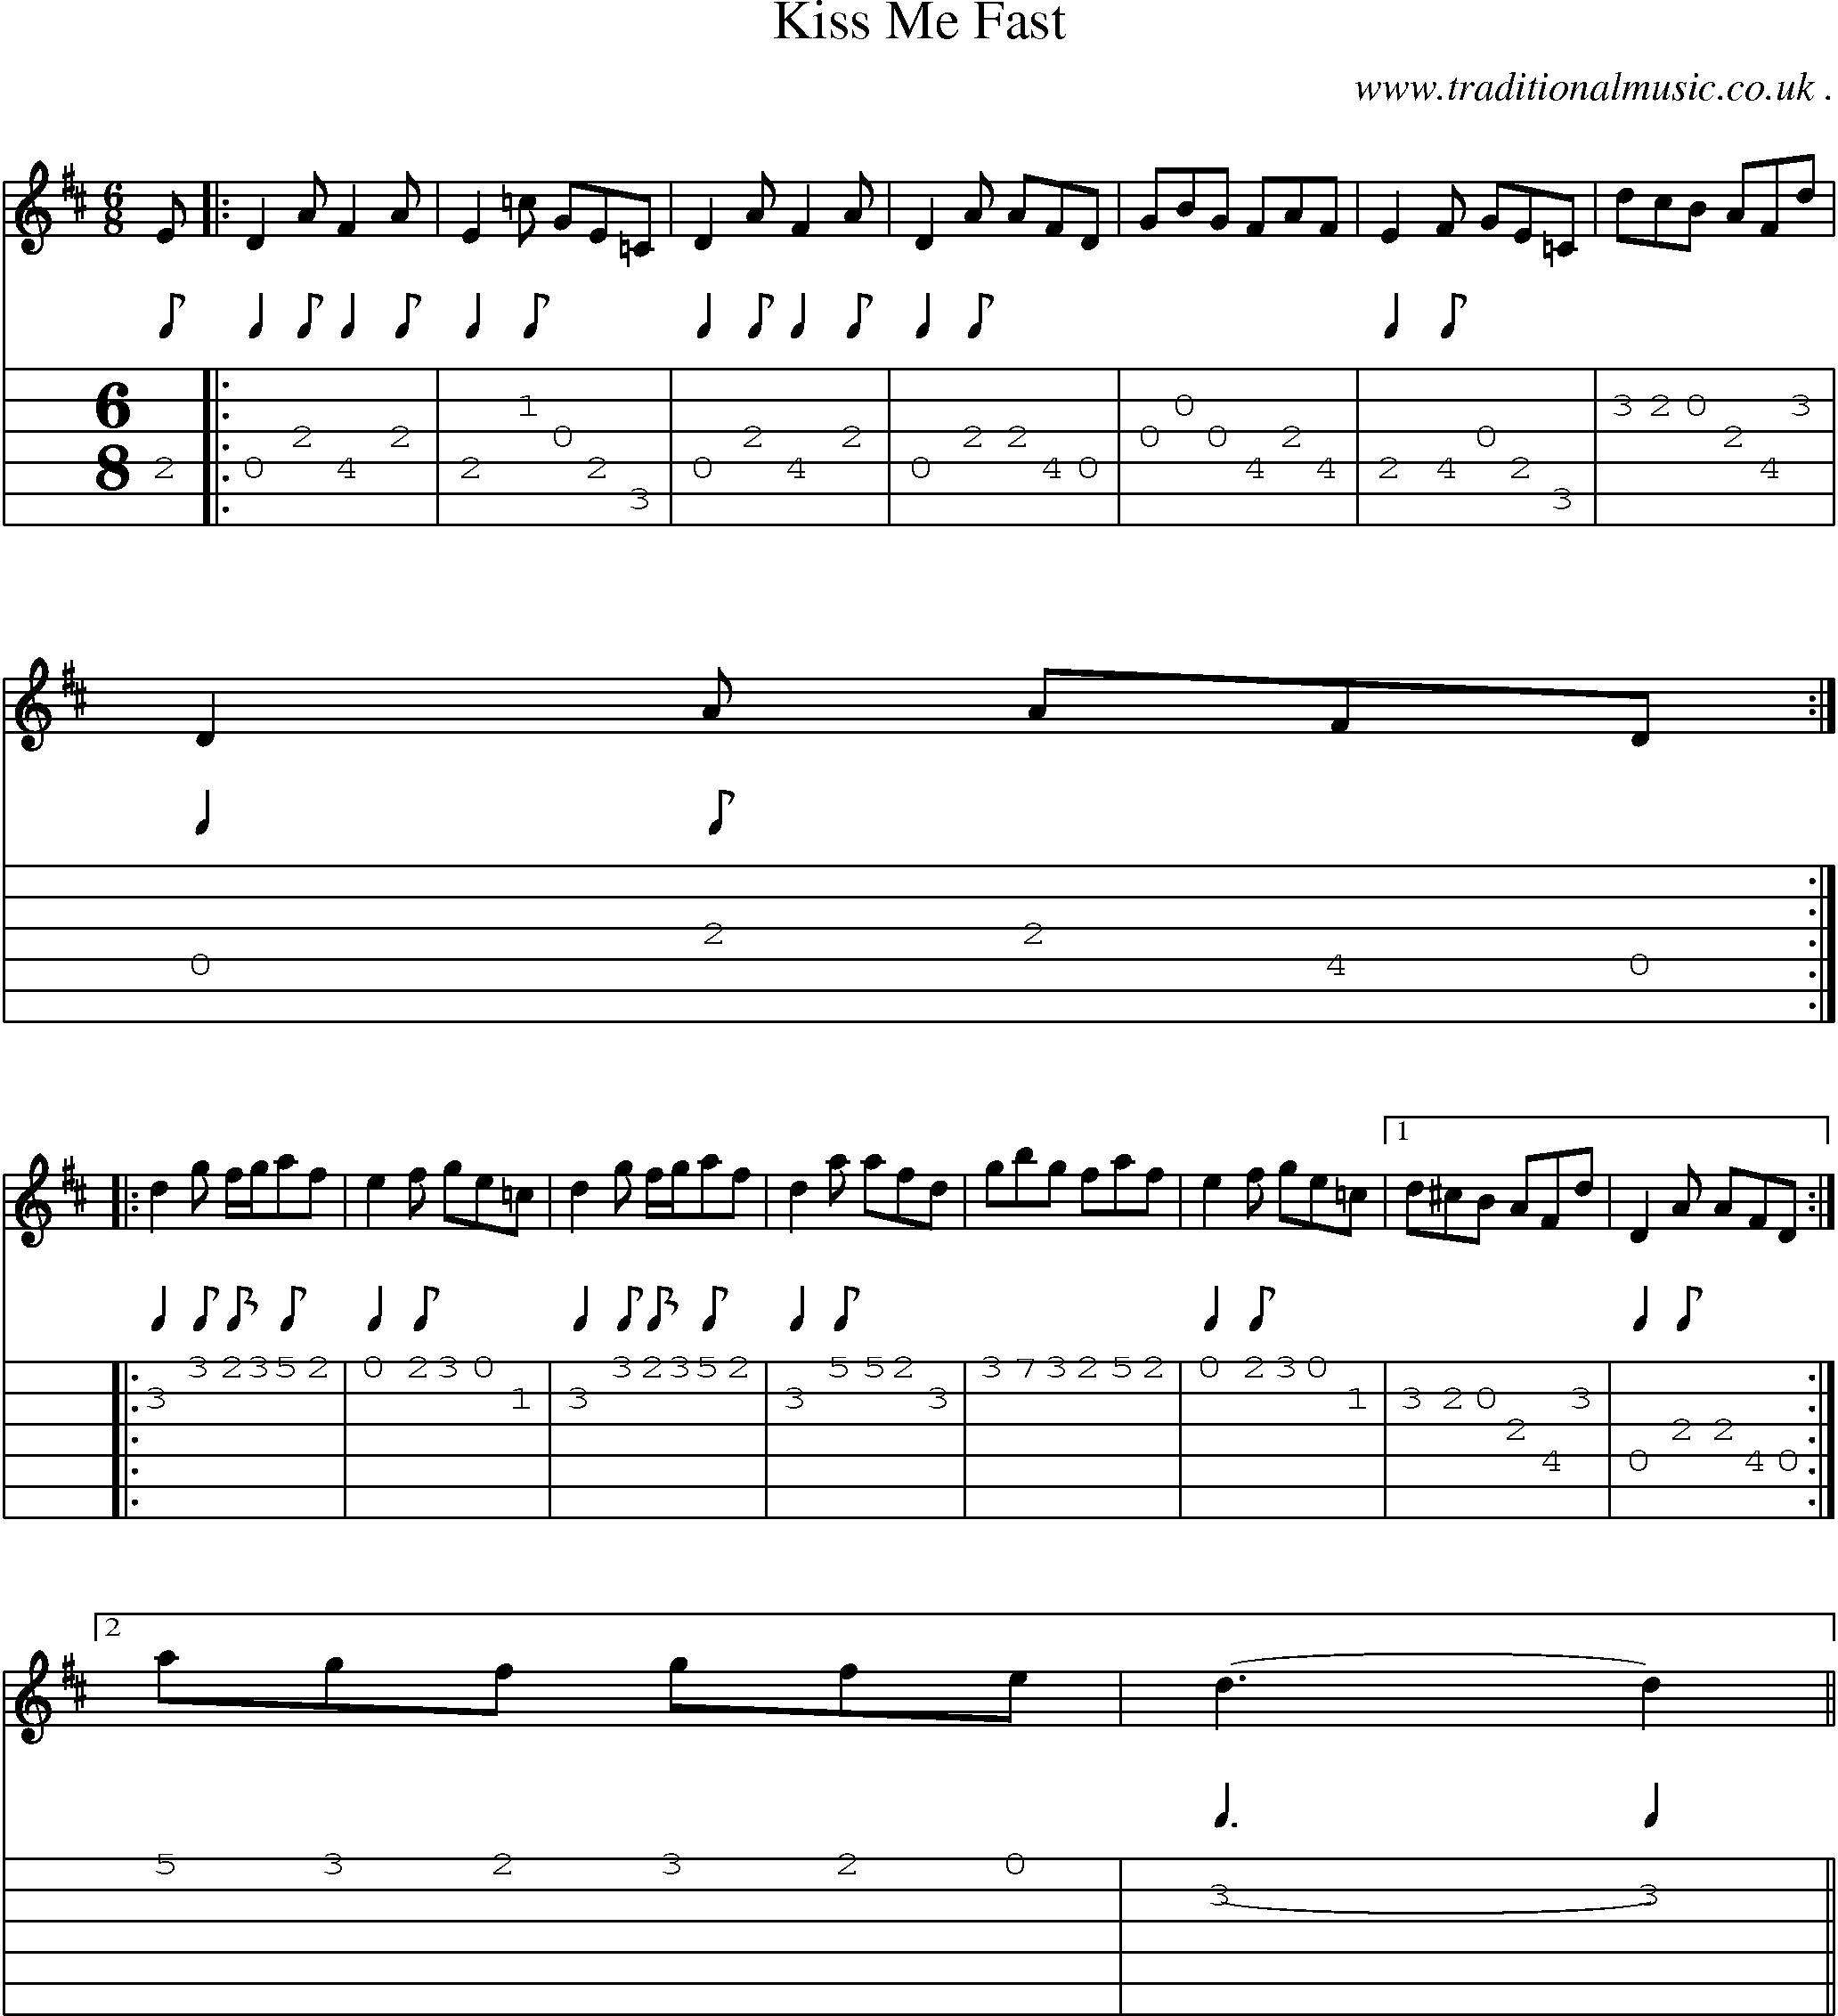 Sheet-music  score, Chords and Guitar Tabs for Kiss Me Fast